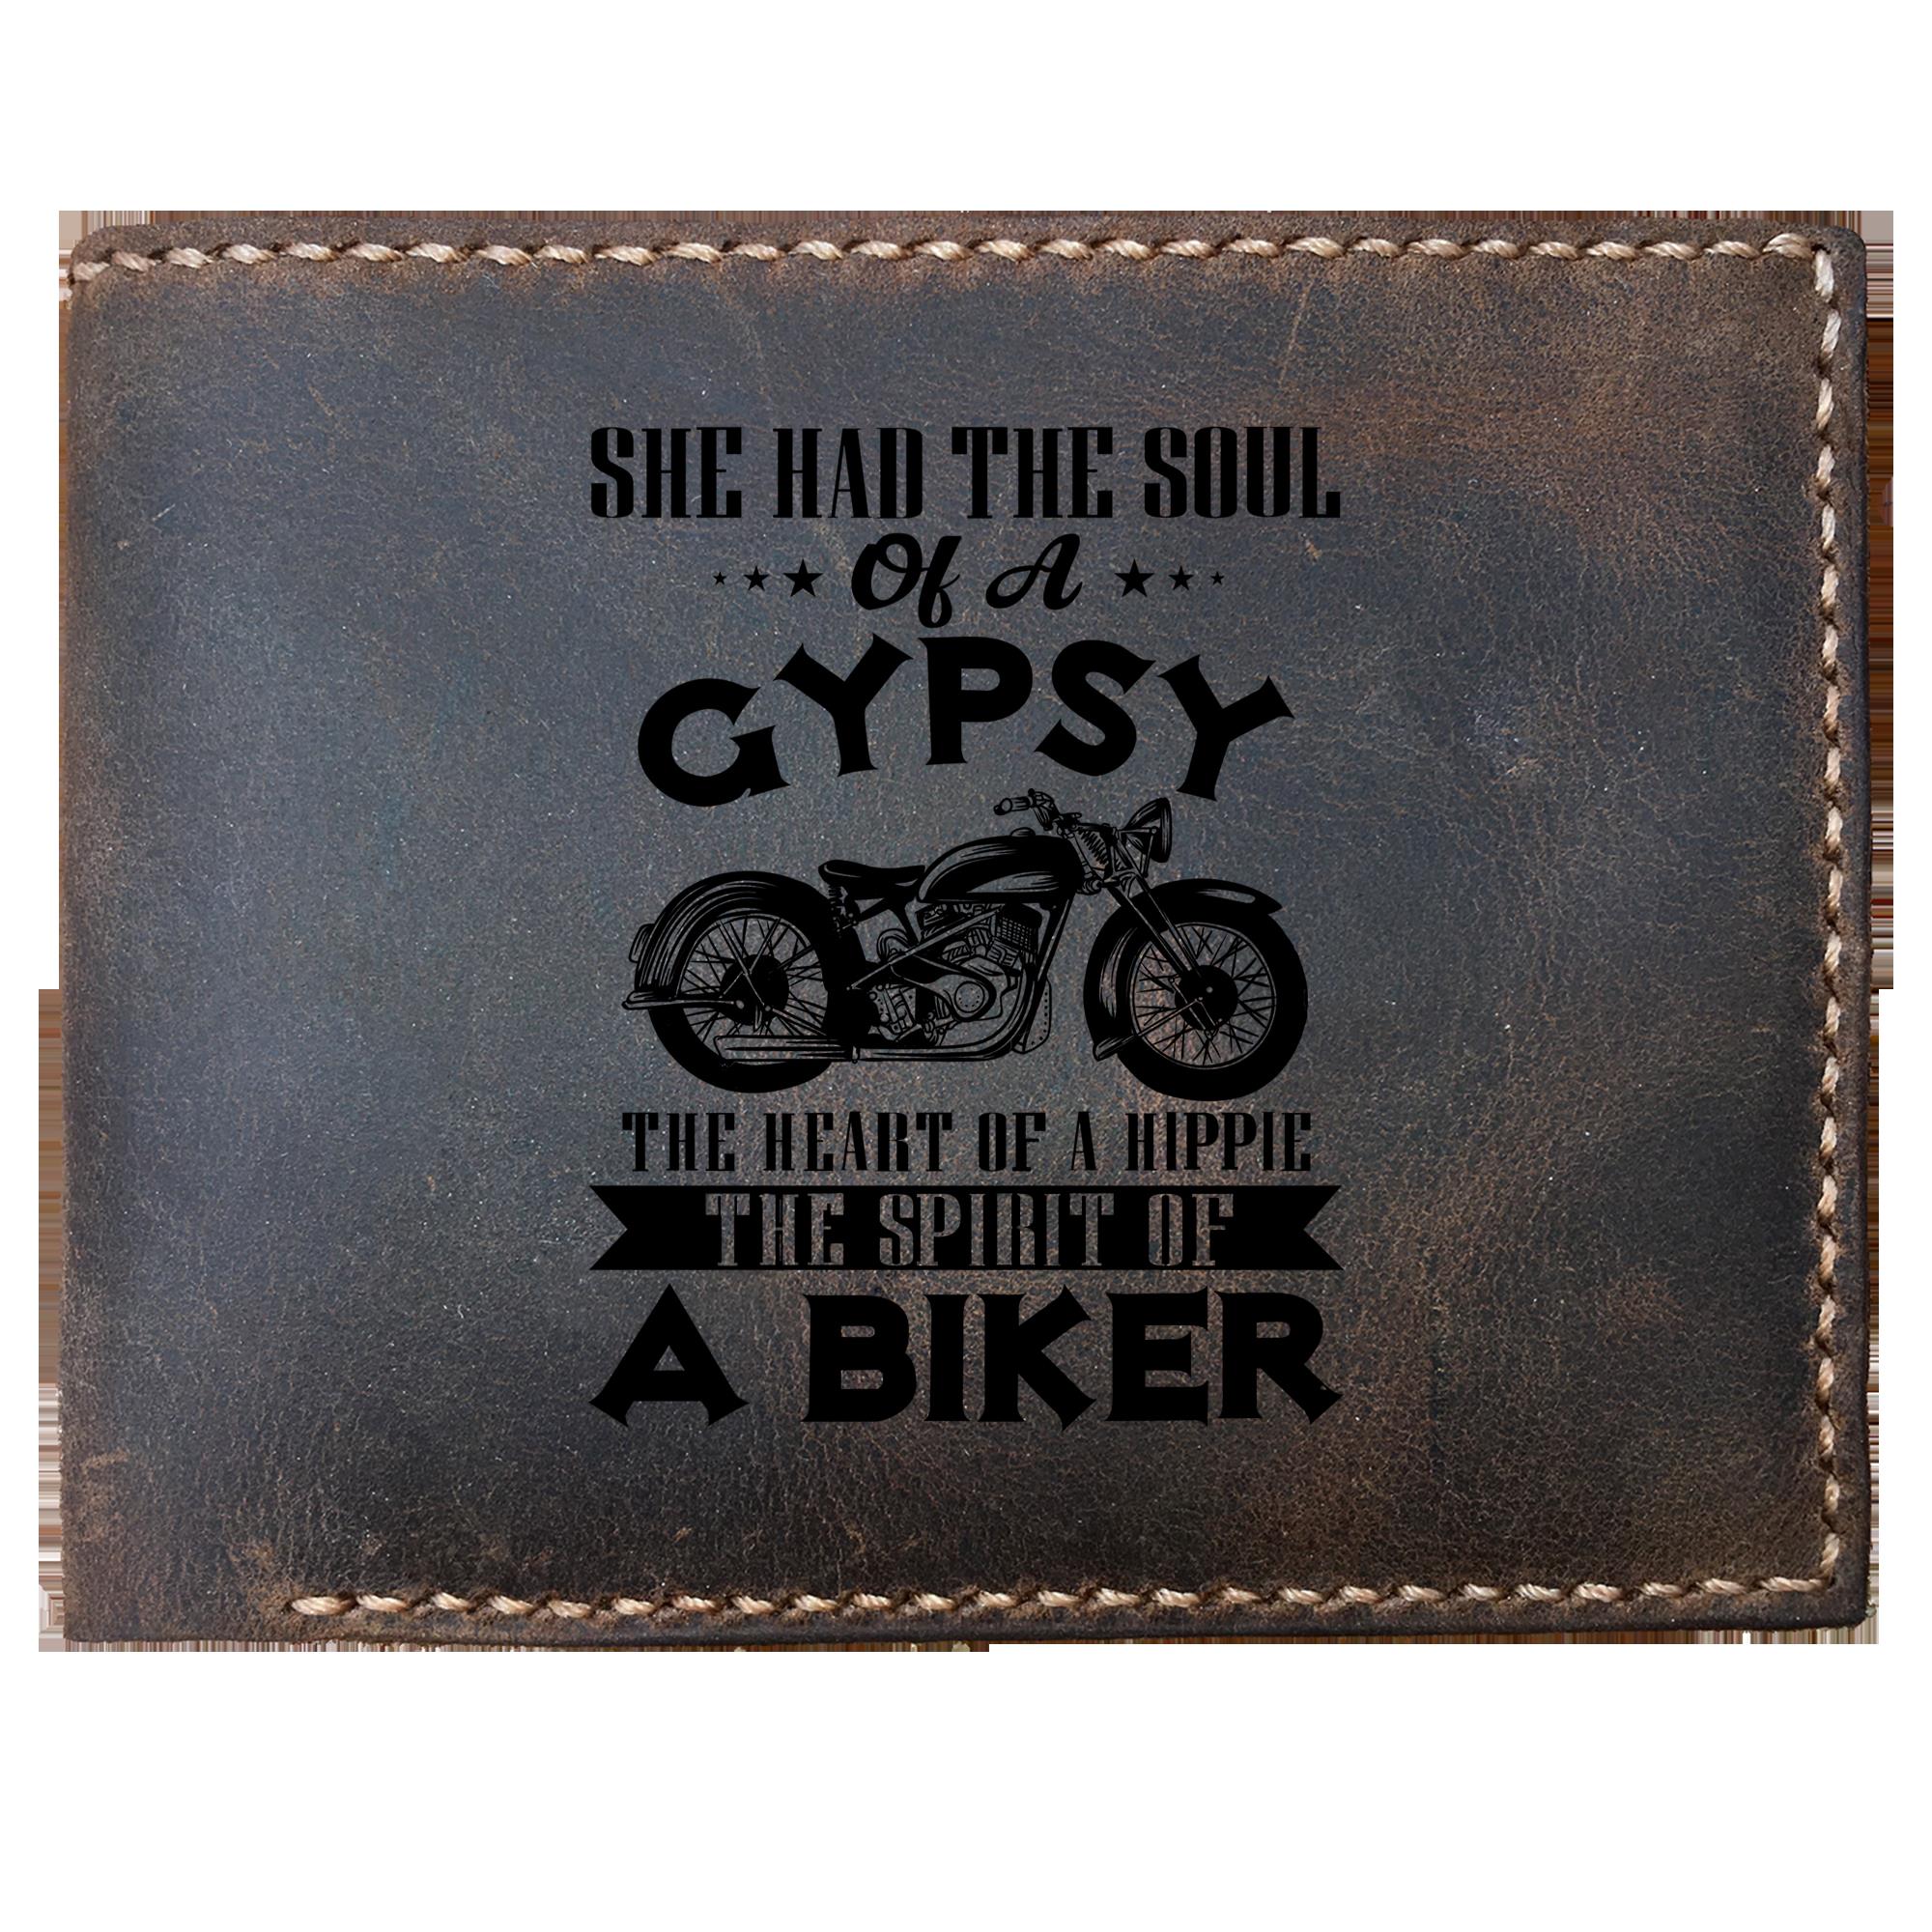 Skitongifts Funny Custom Laser Engraved Bifold Leather Wallet For Men, She Had The Soul Of A Gypsy The Heart Of A Hippie The Spirit Of A Biker